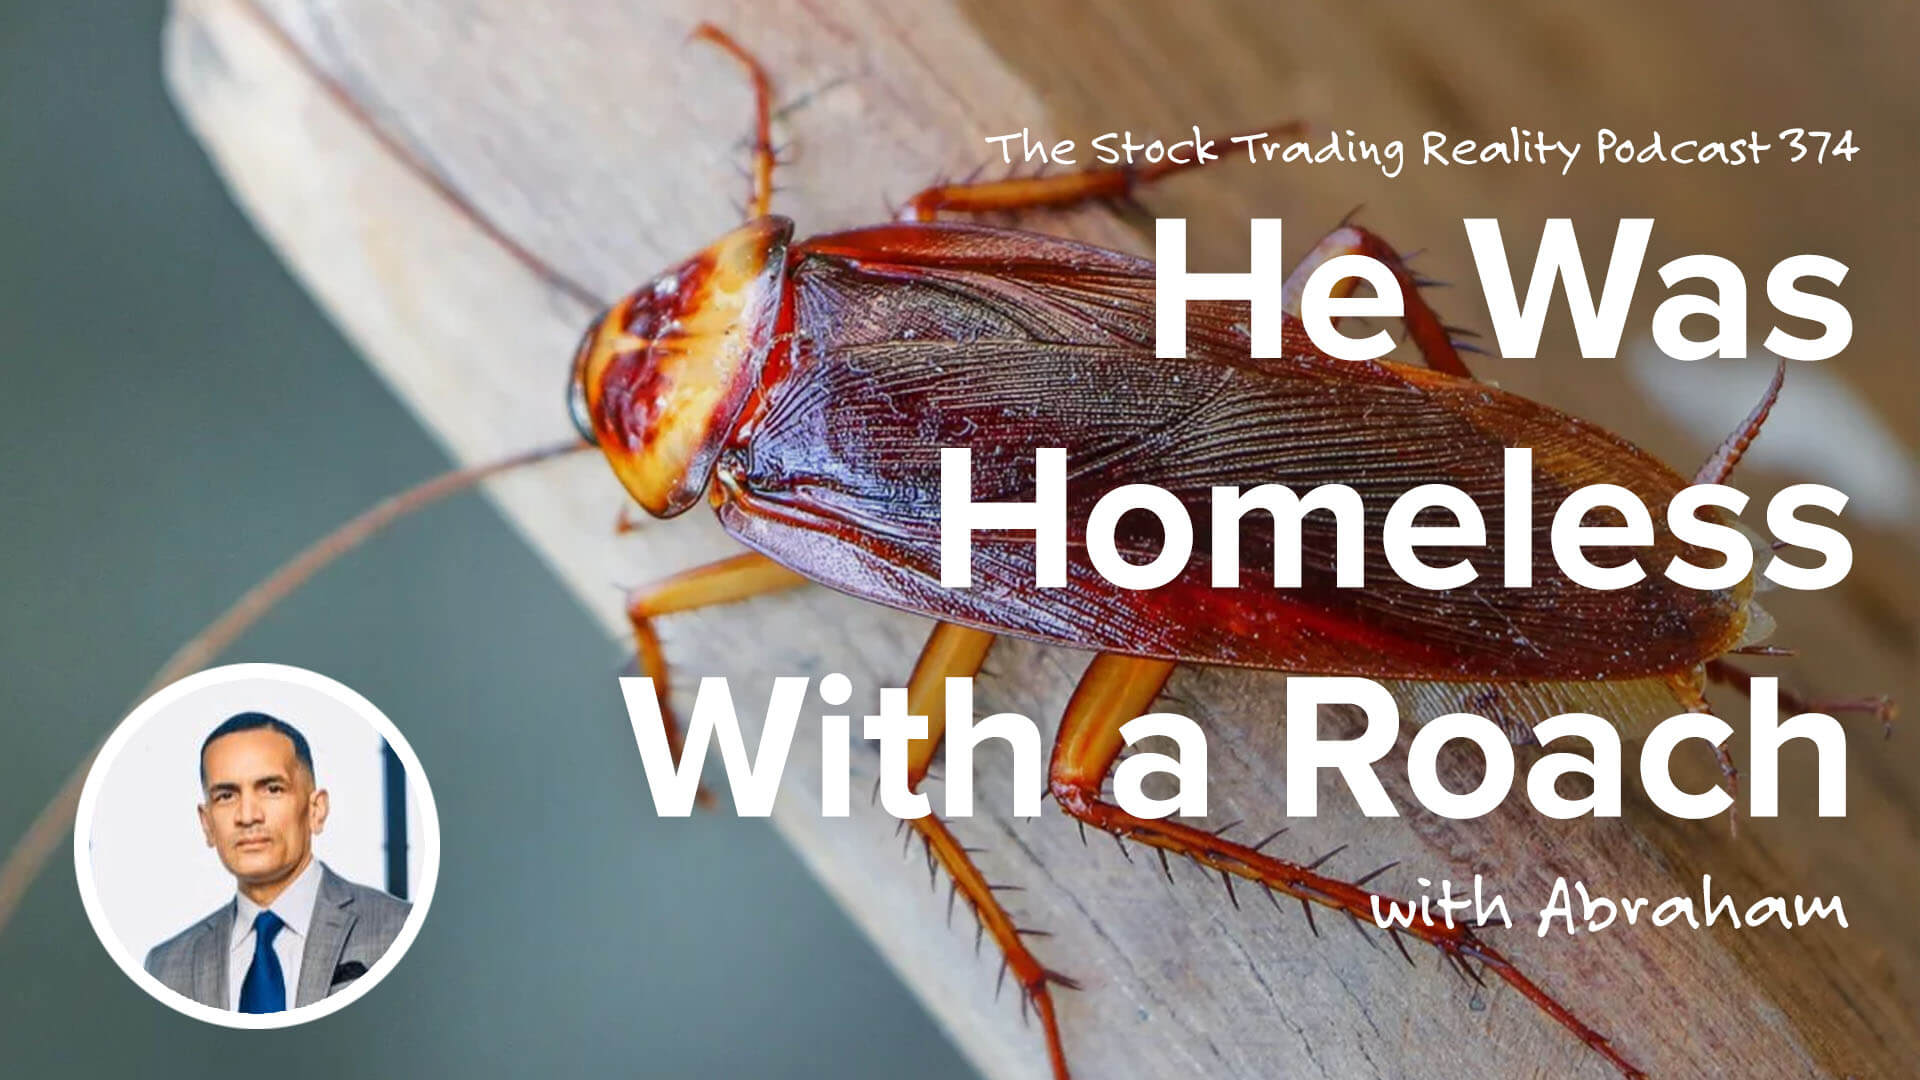 He Was Homeless With a Roach